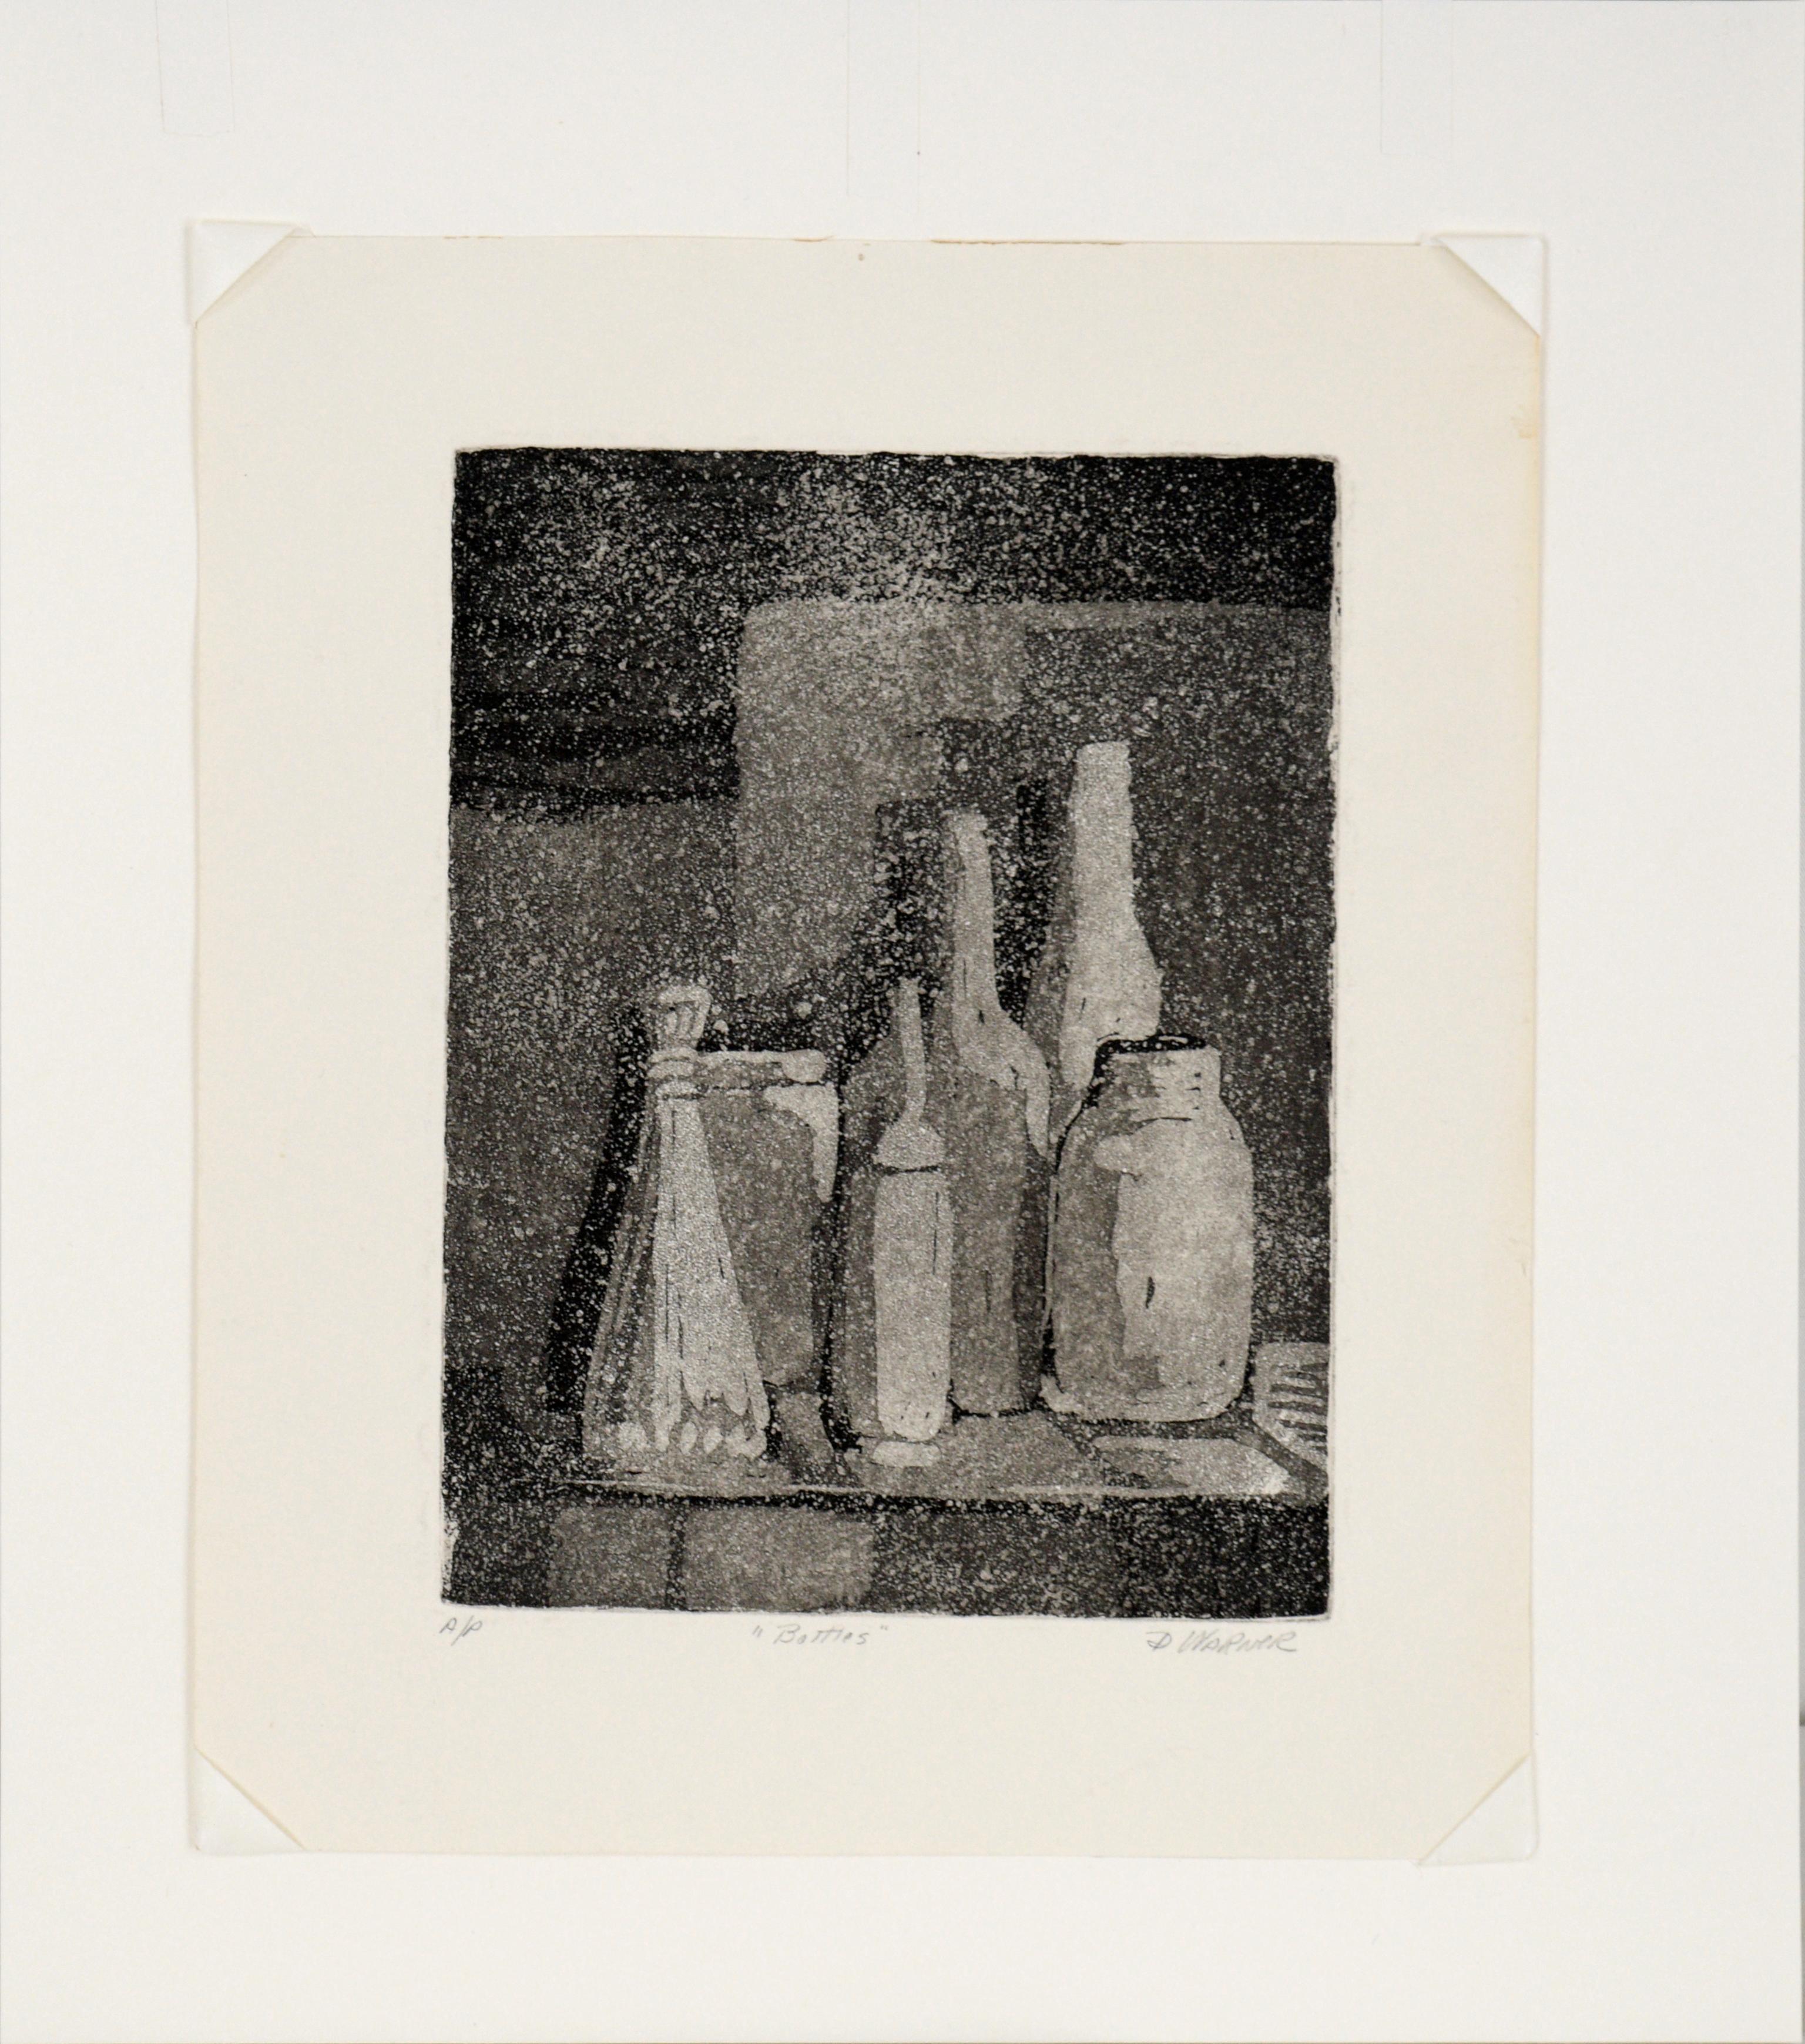 Still life etching by Doris Ann Warner (American, 1925-2010). Several ornate bottles are arranged on a shelf. There is a splatter effect in this piece, creating a sense of blurriness, even though the shapes are well-defined. 

Numbered, titled, and